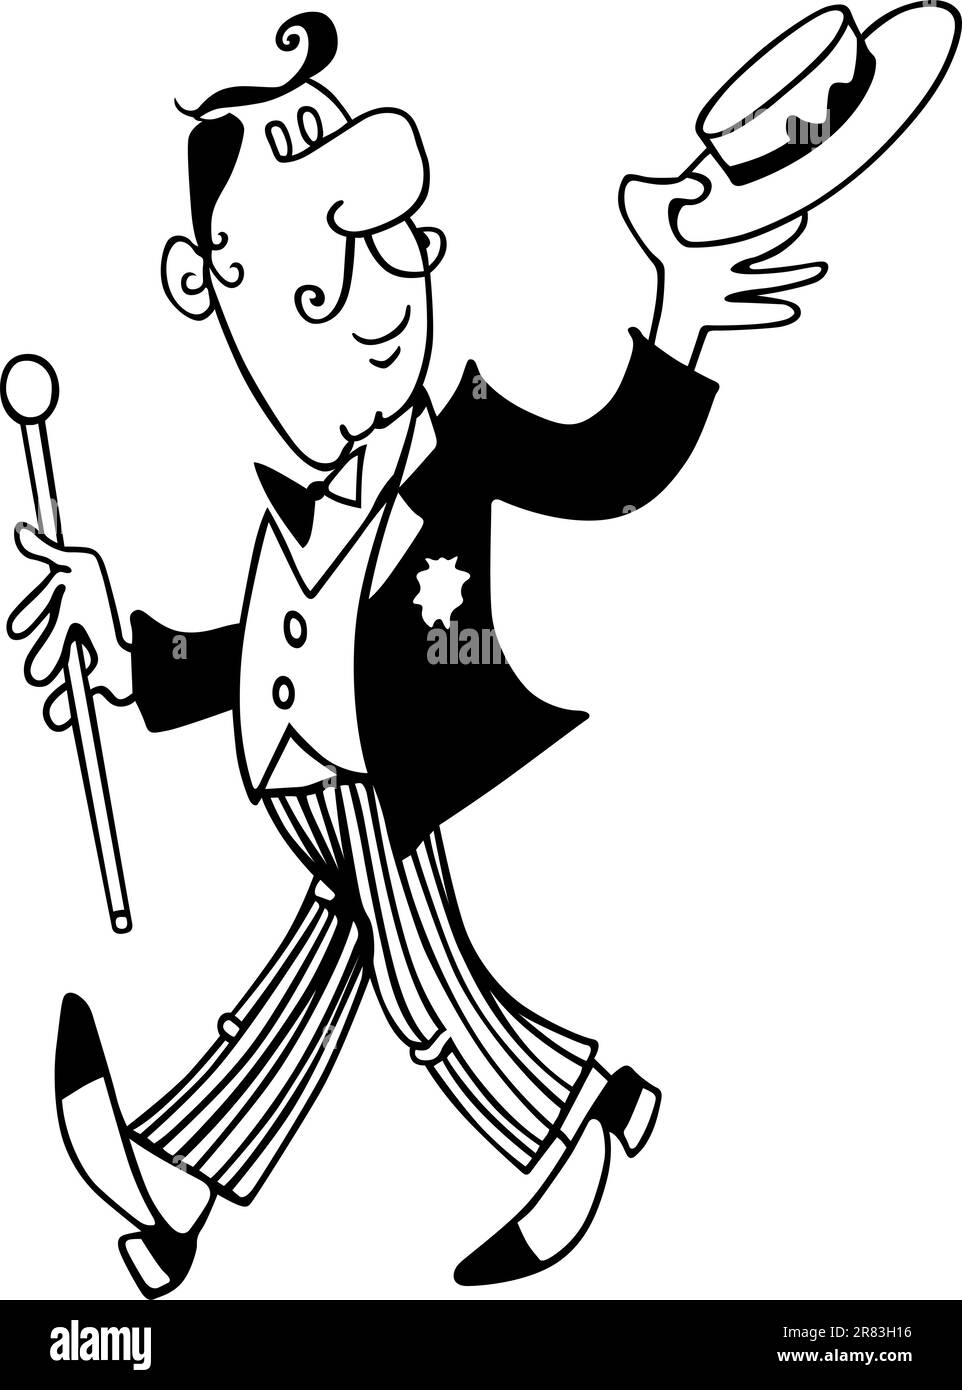 Gentleman going for a walk with hat and stick Stock Vector